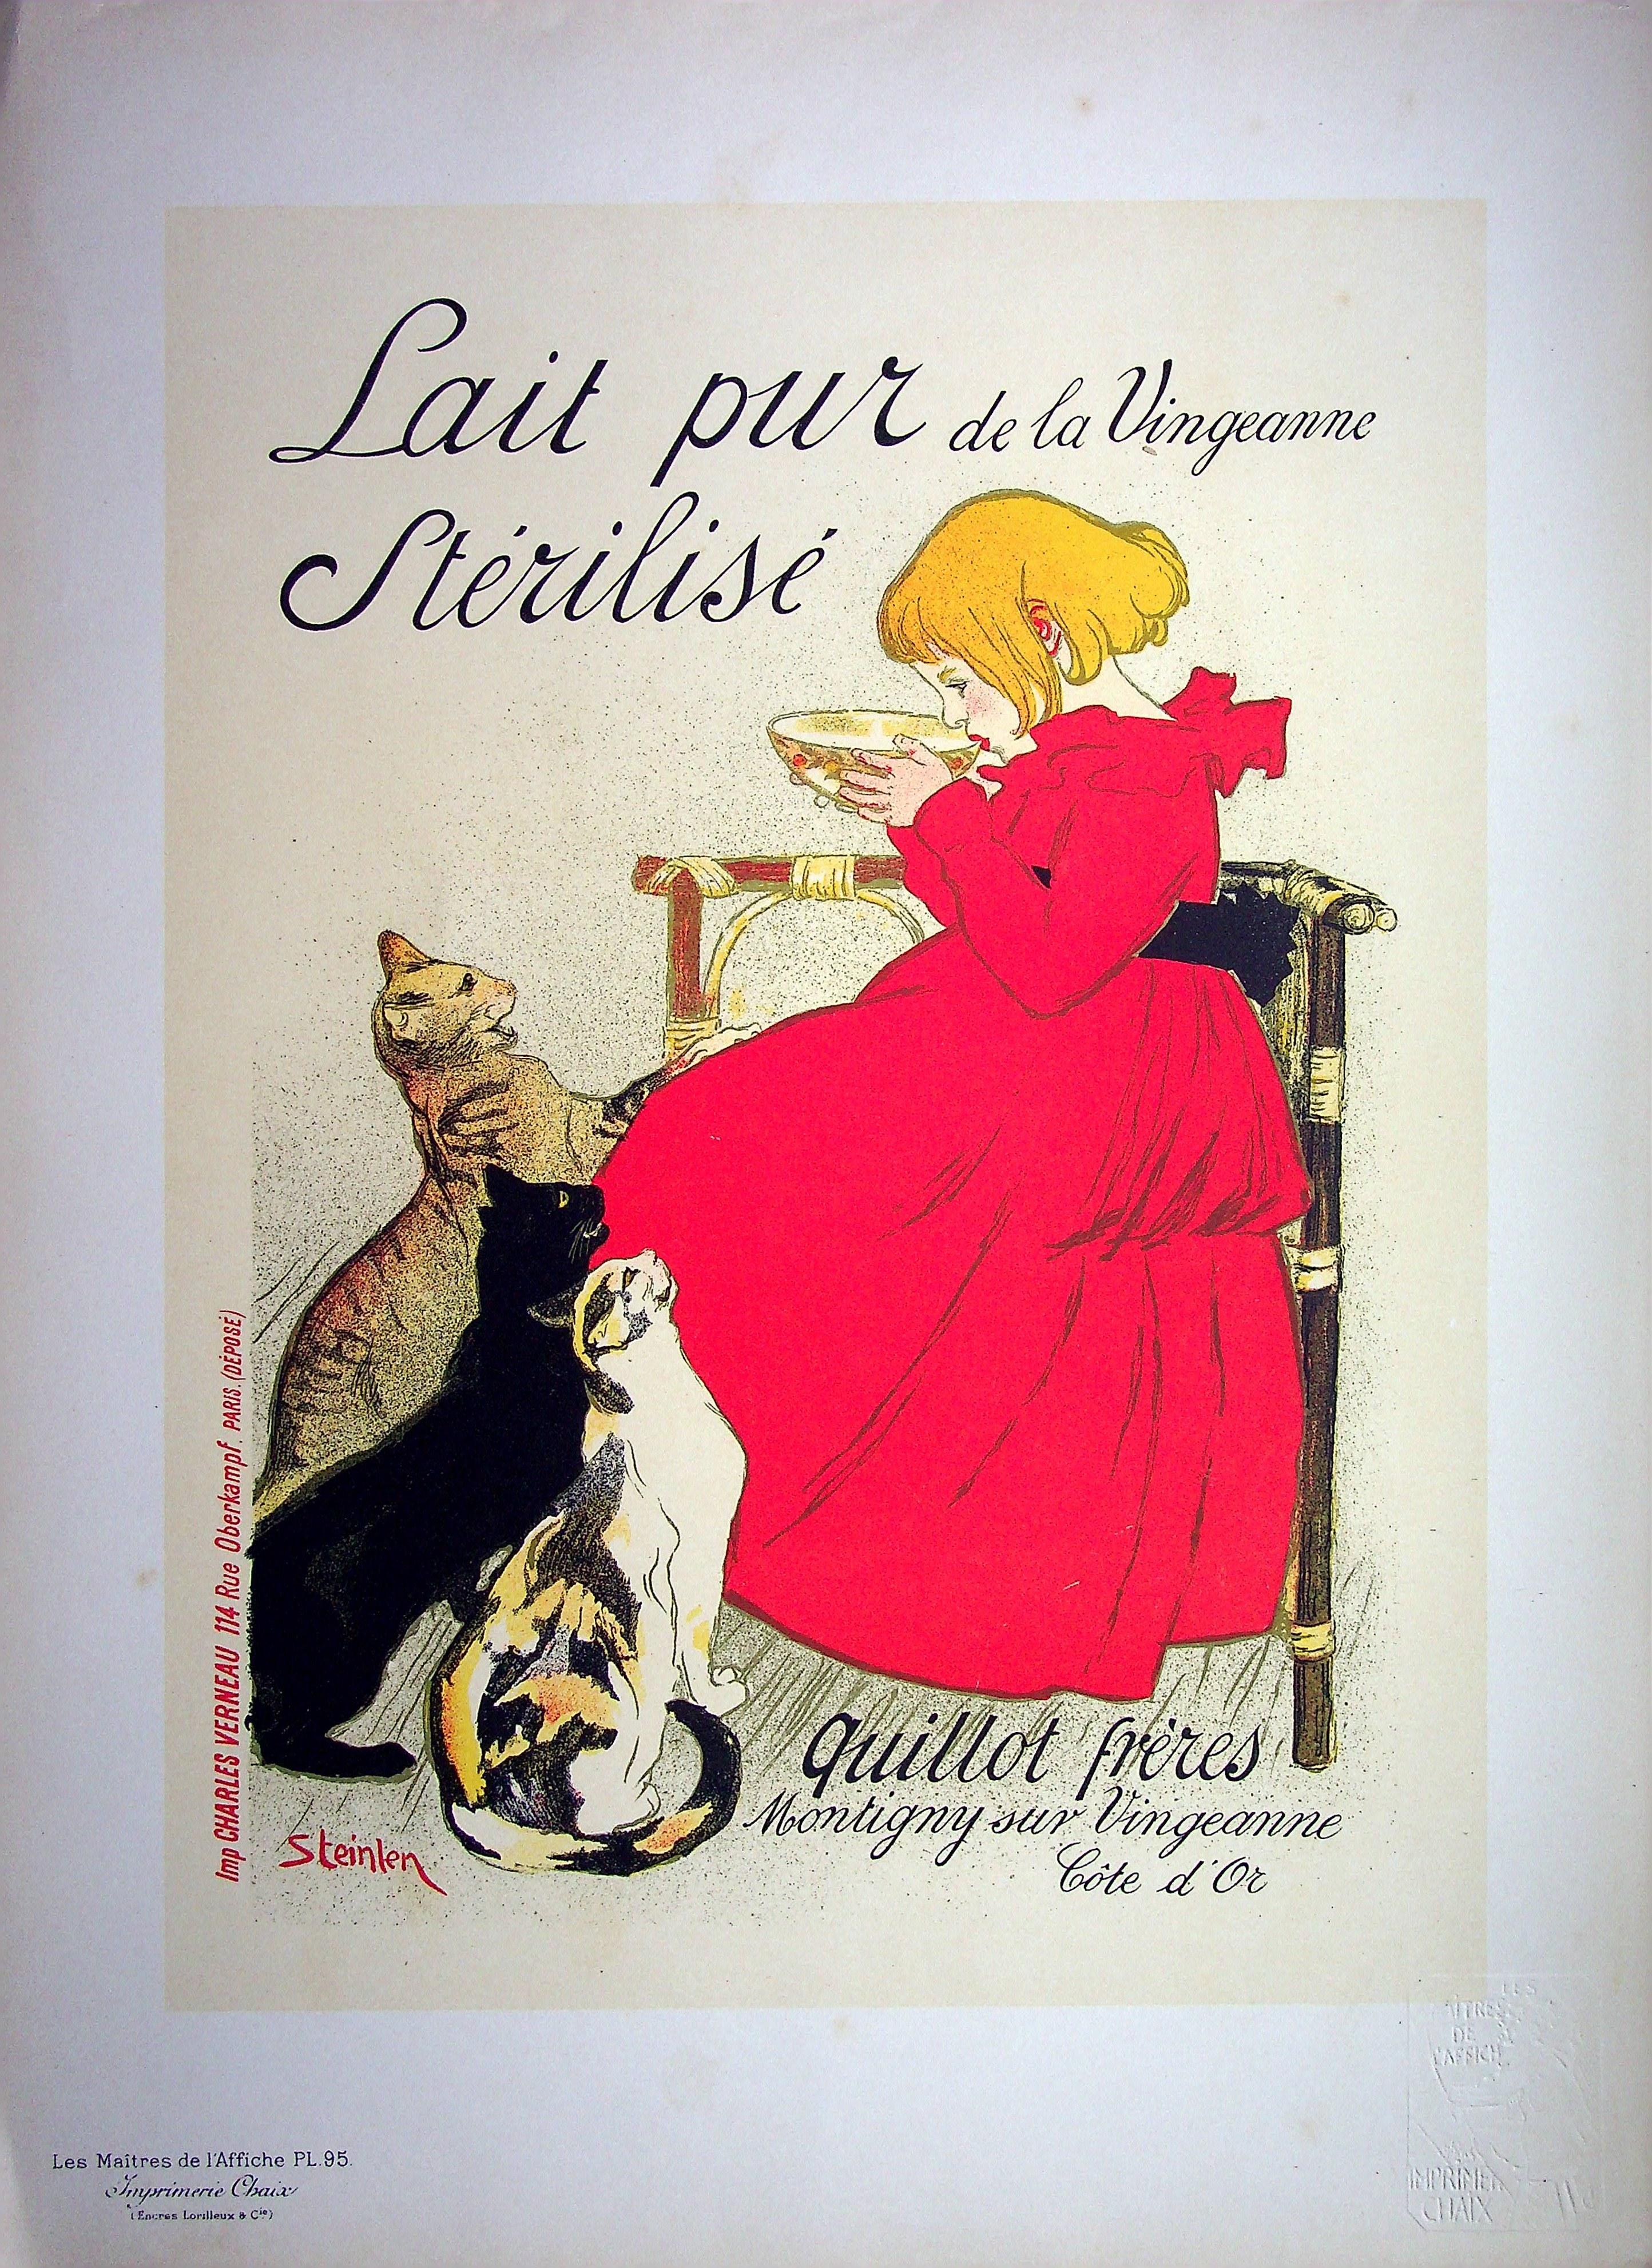 Théophile Alexandre STEINLEN
Girl with Cats (Lait Pur sterilise), 1897

Stone lithograph
Printed signature in the plate
On vellum 
Size 39 x 29 cm (c. 15.3 x 11.4